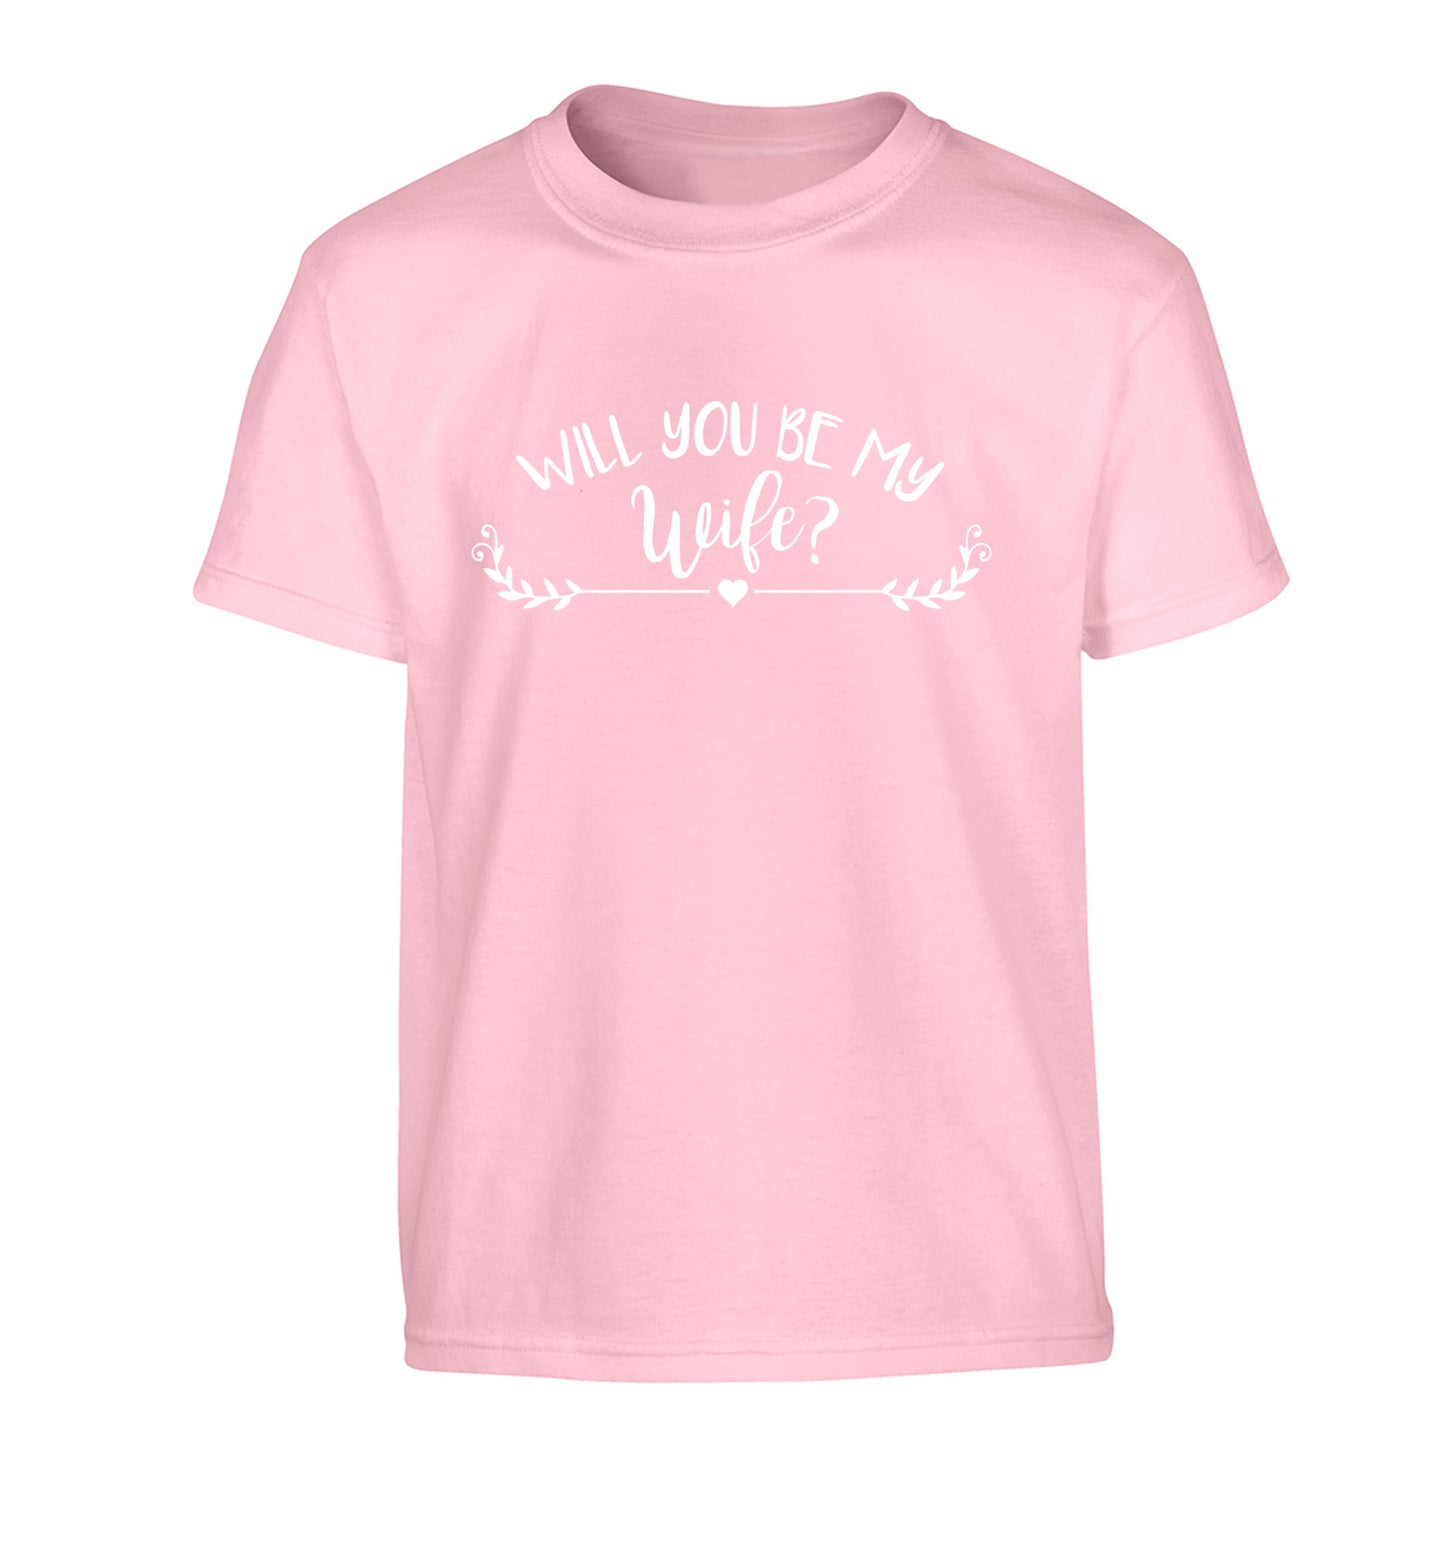 Will you be my wife? Children's light pink Tshirt 12-14 Years